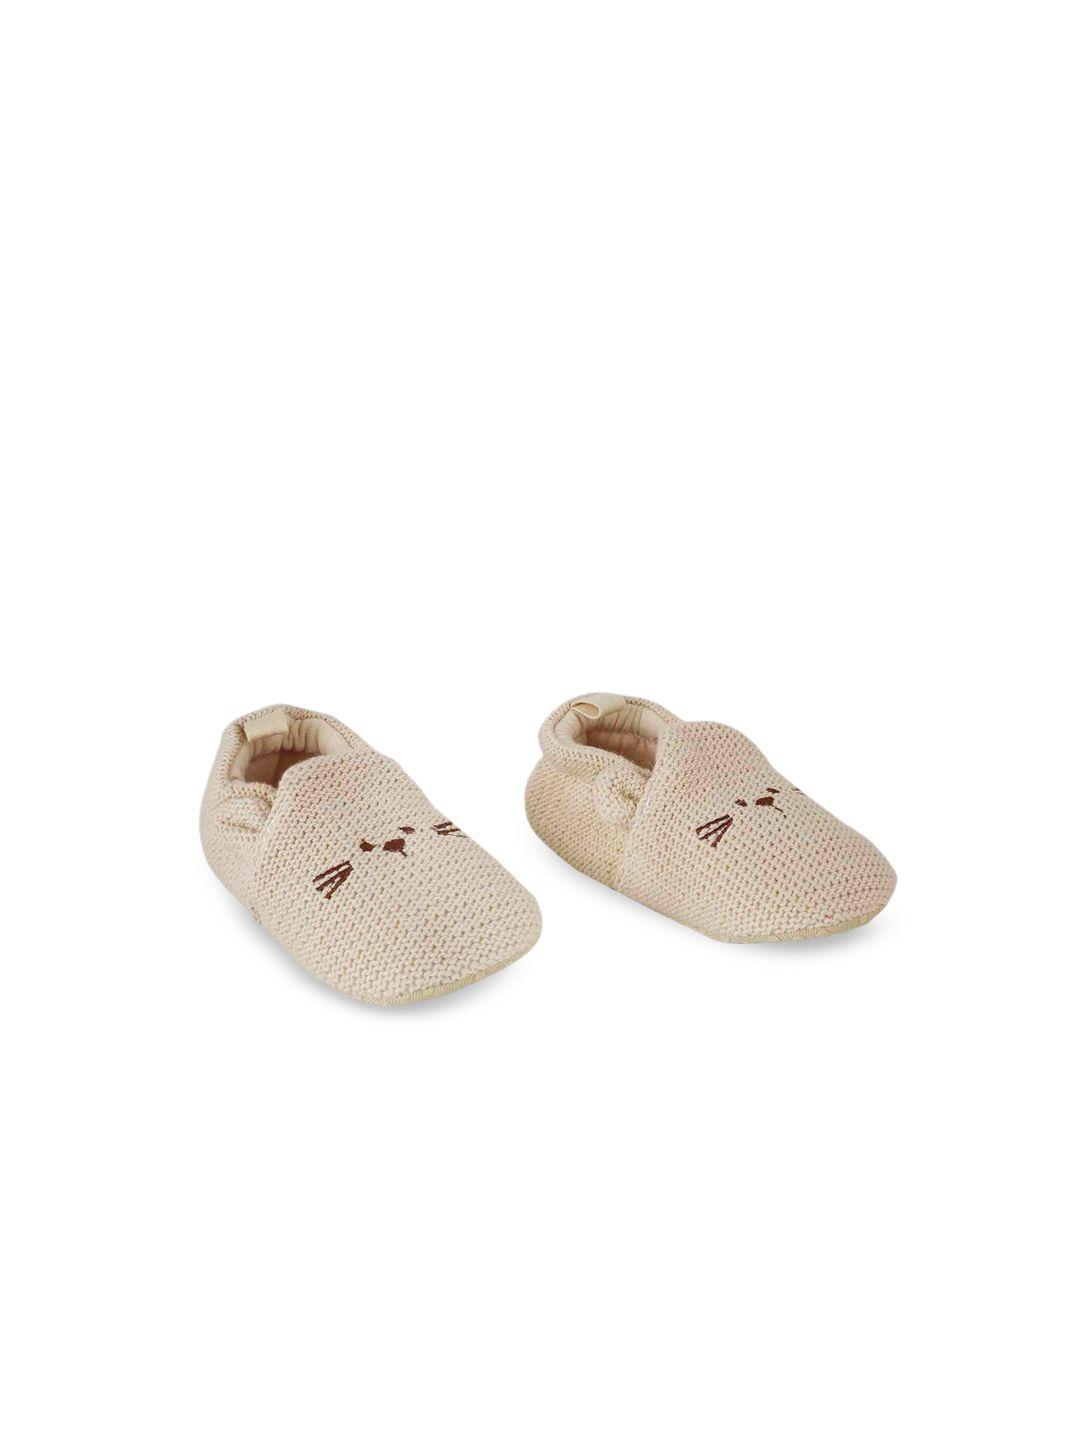 baby moo infants brown knitted booties